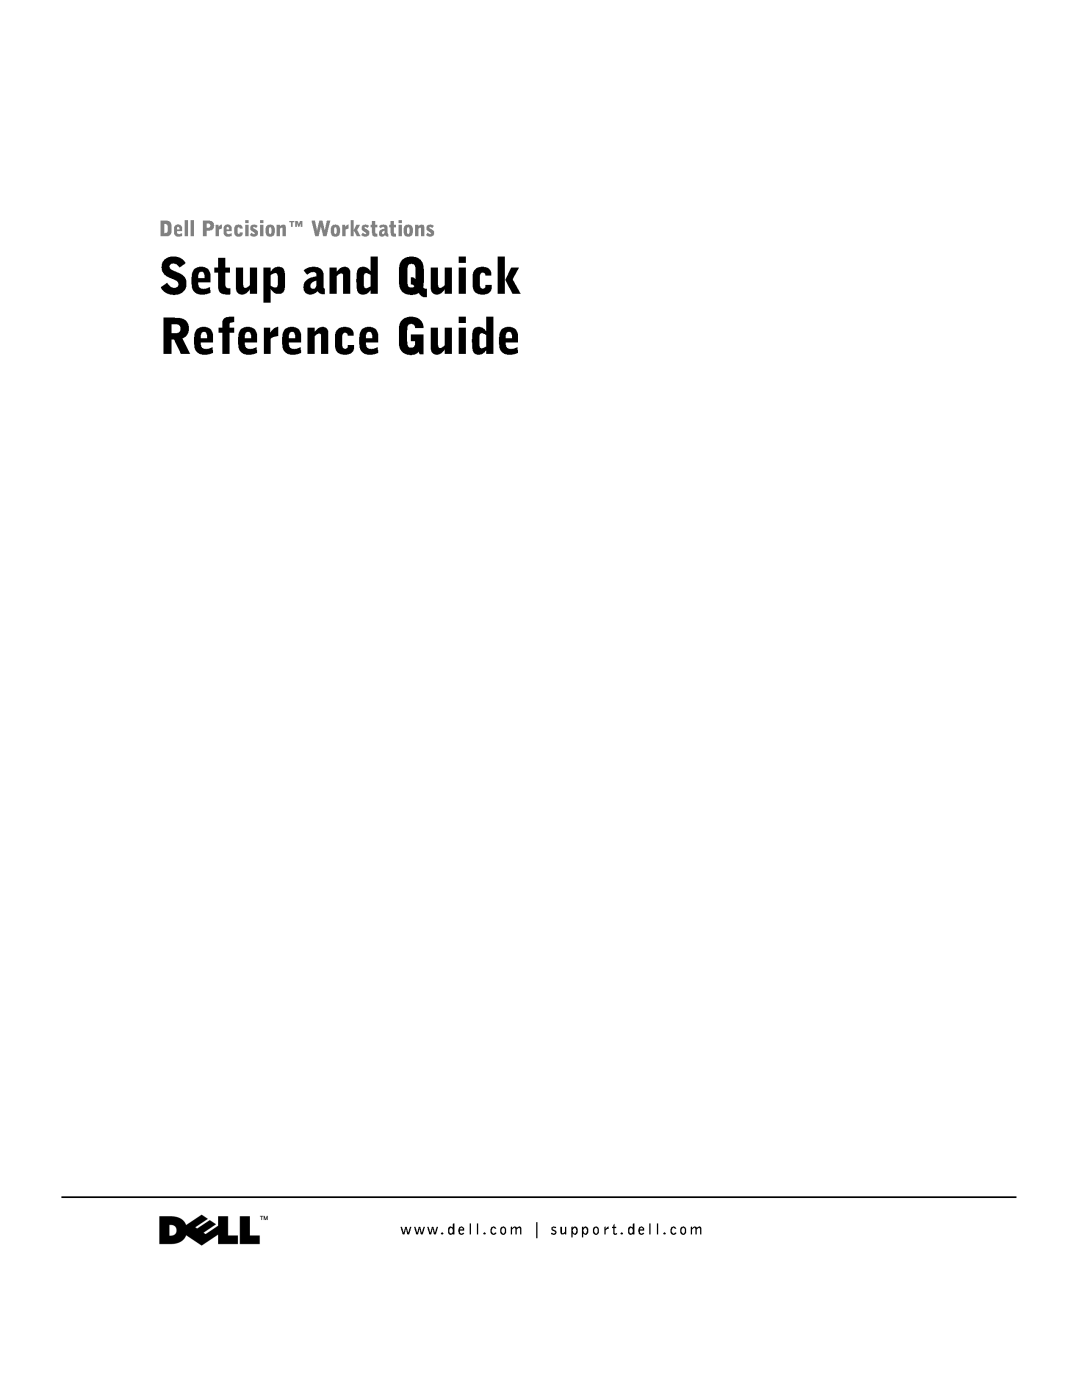 Dell 1G155 manual Setup and Quick Reference Guide, Dell Precision Workstations 